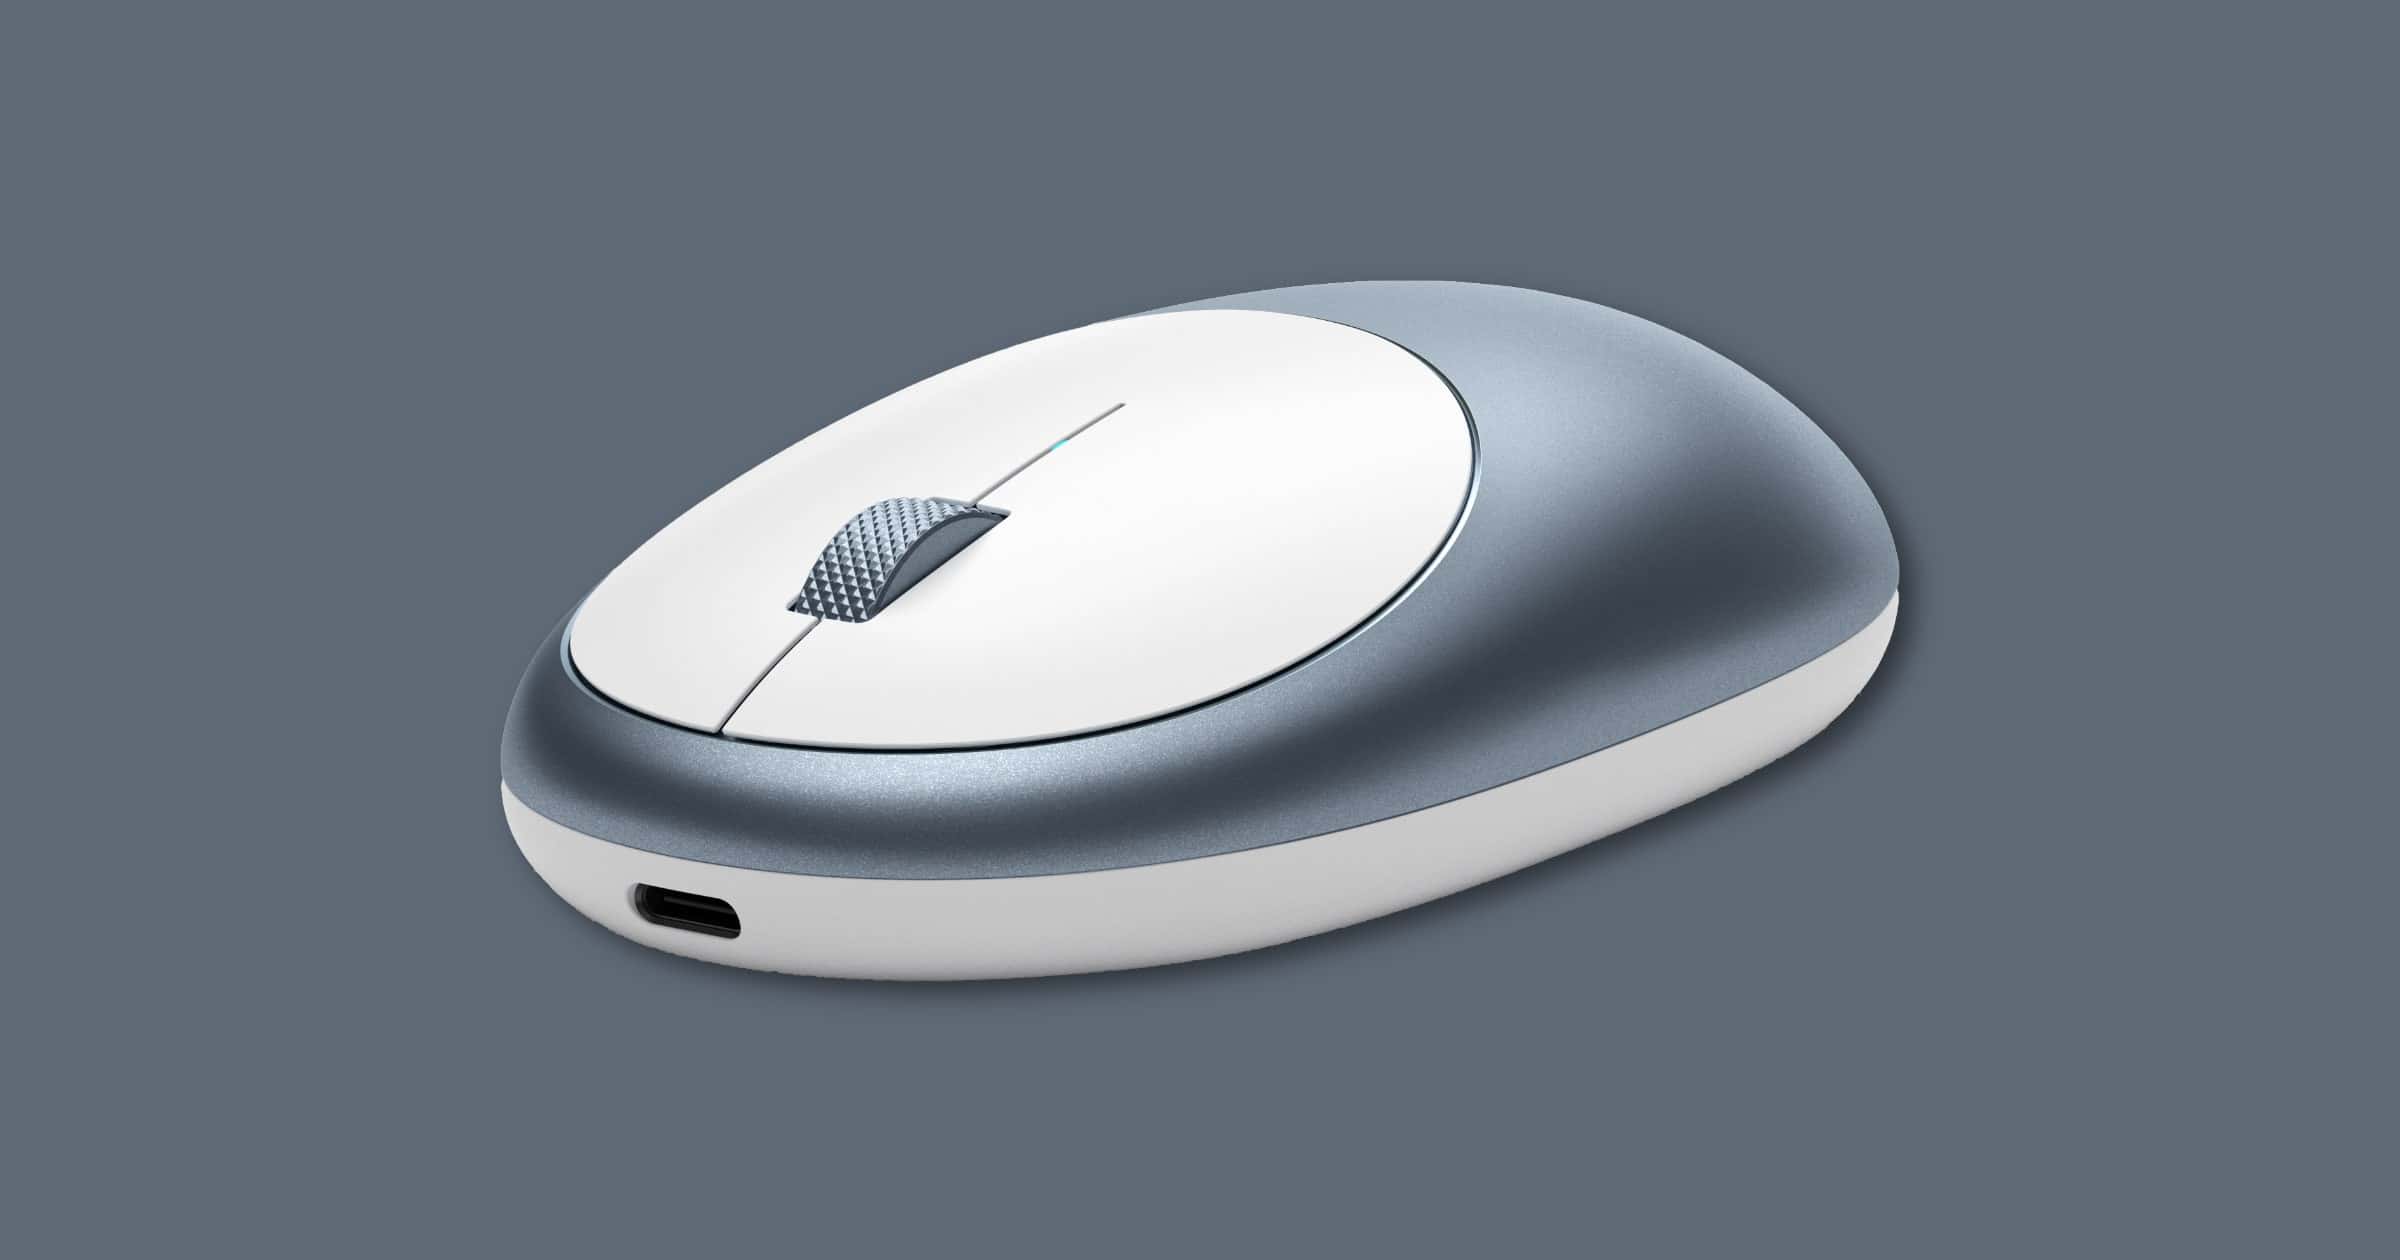 satechi blue M1 wireless mouse